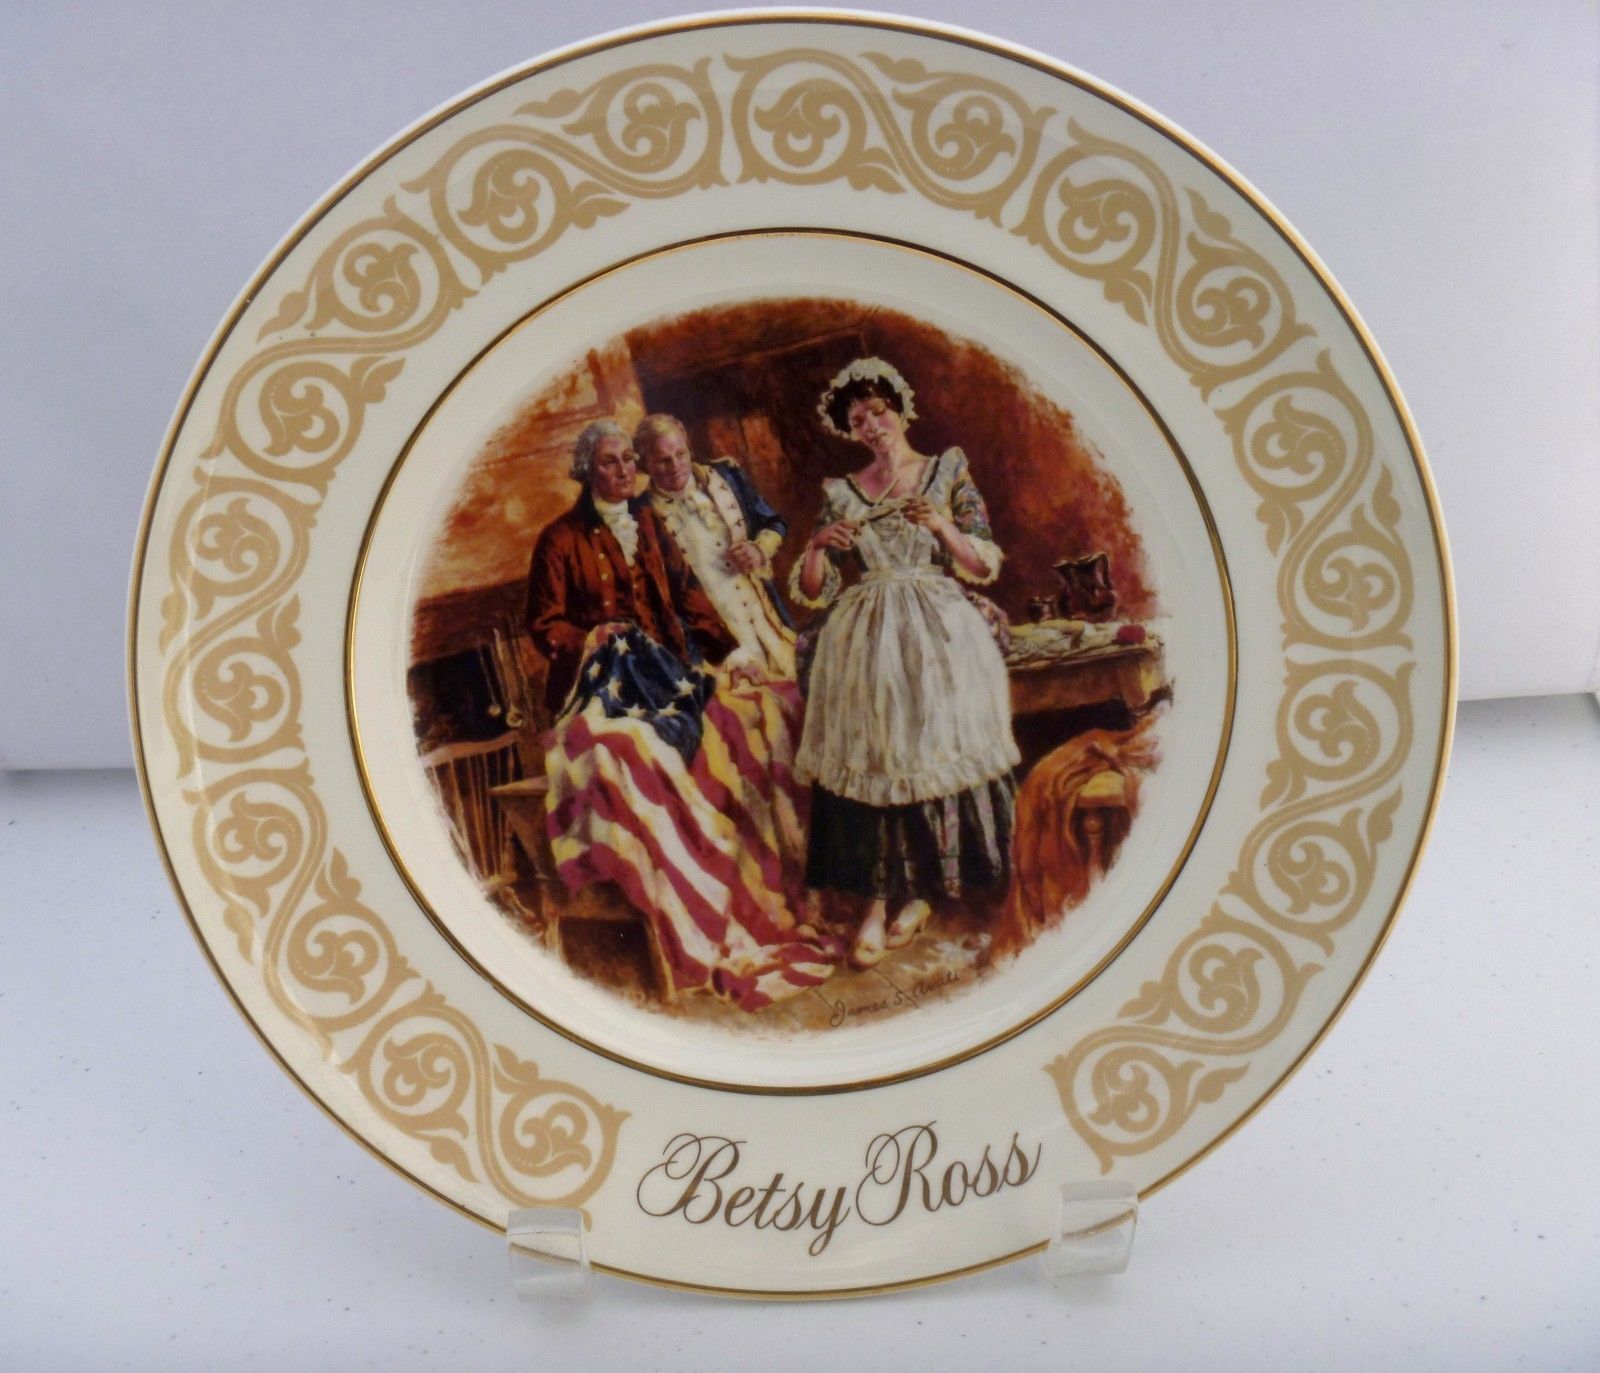 Betsy Ross Patriot Flagmaker, 8 ½” 1973 Collectors OR serving  plate by Avon - $6.92